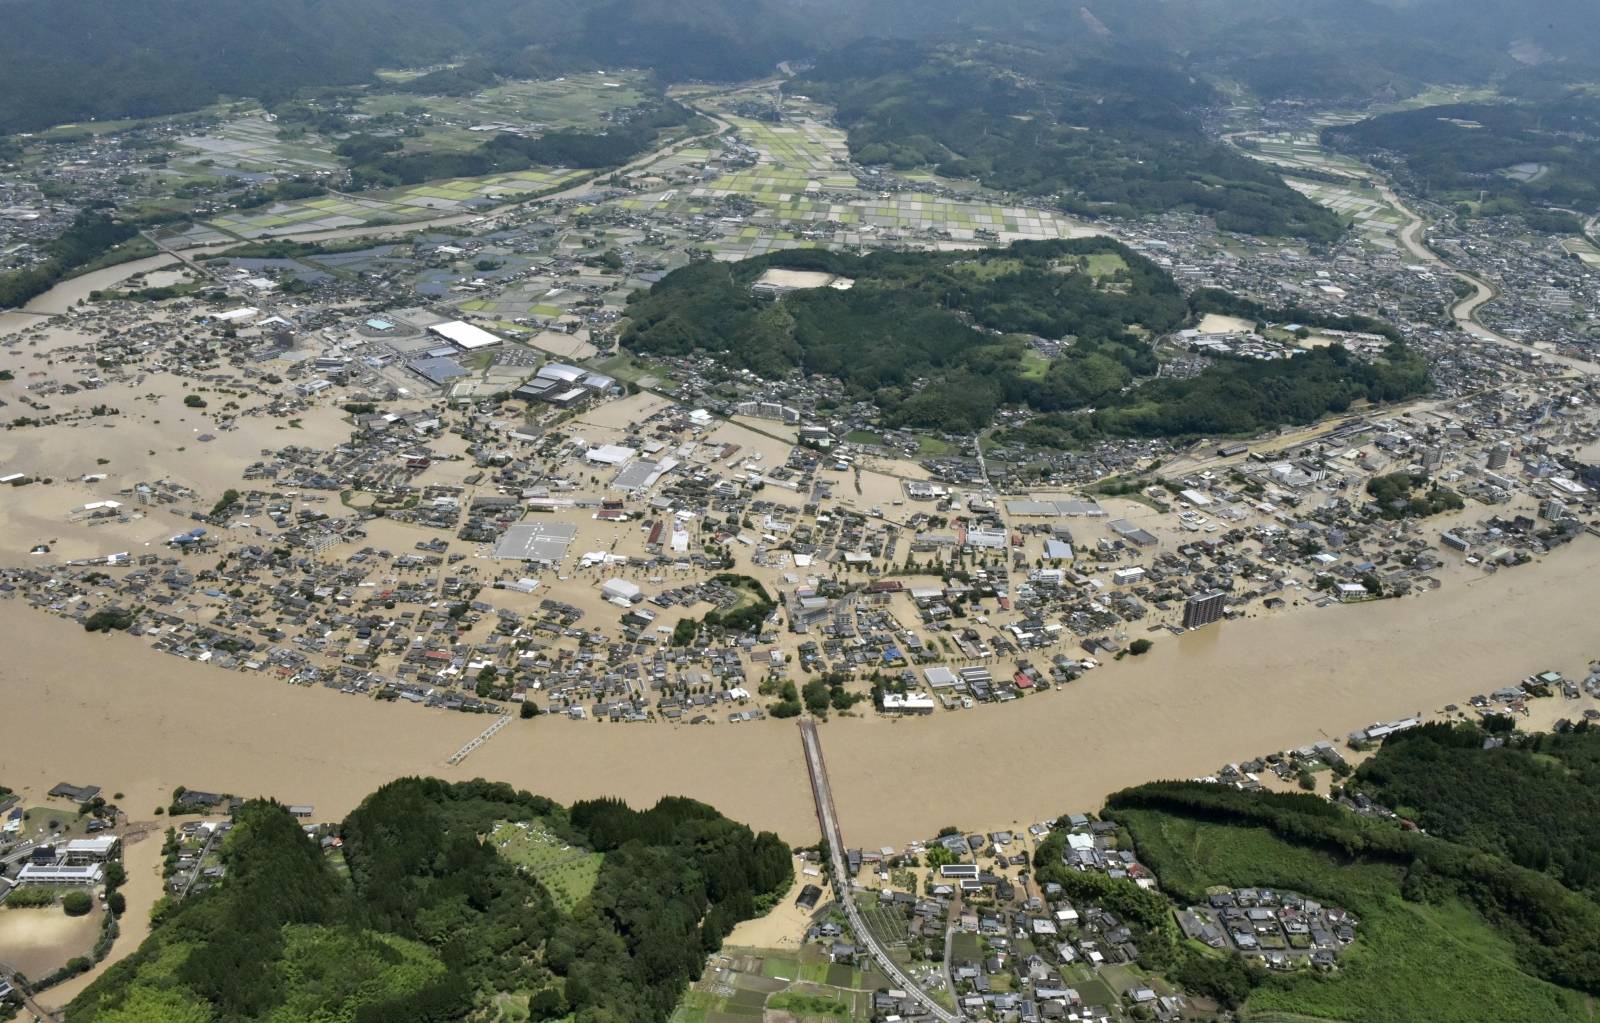 An aerial view shows flooded Kuma River caused by a heavy rain at a residential area in Hitoyoshi, Japan